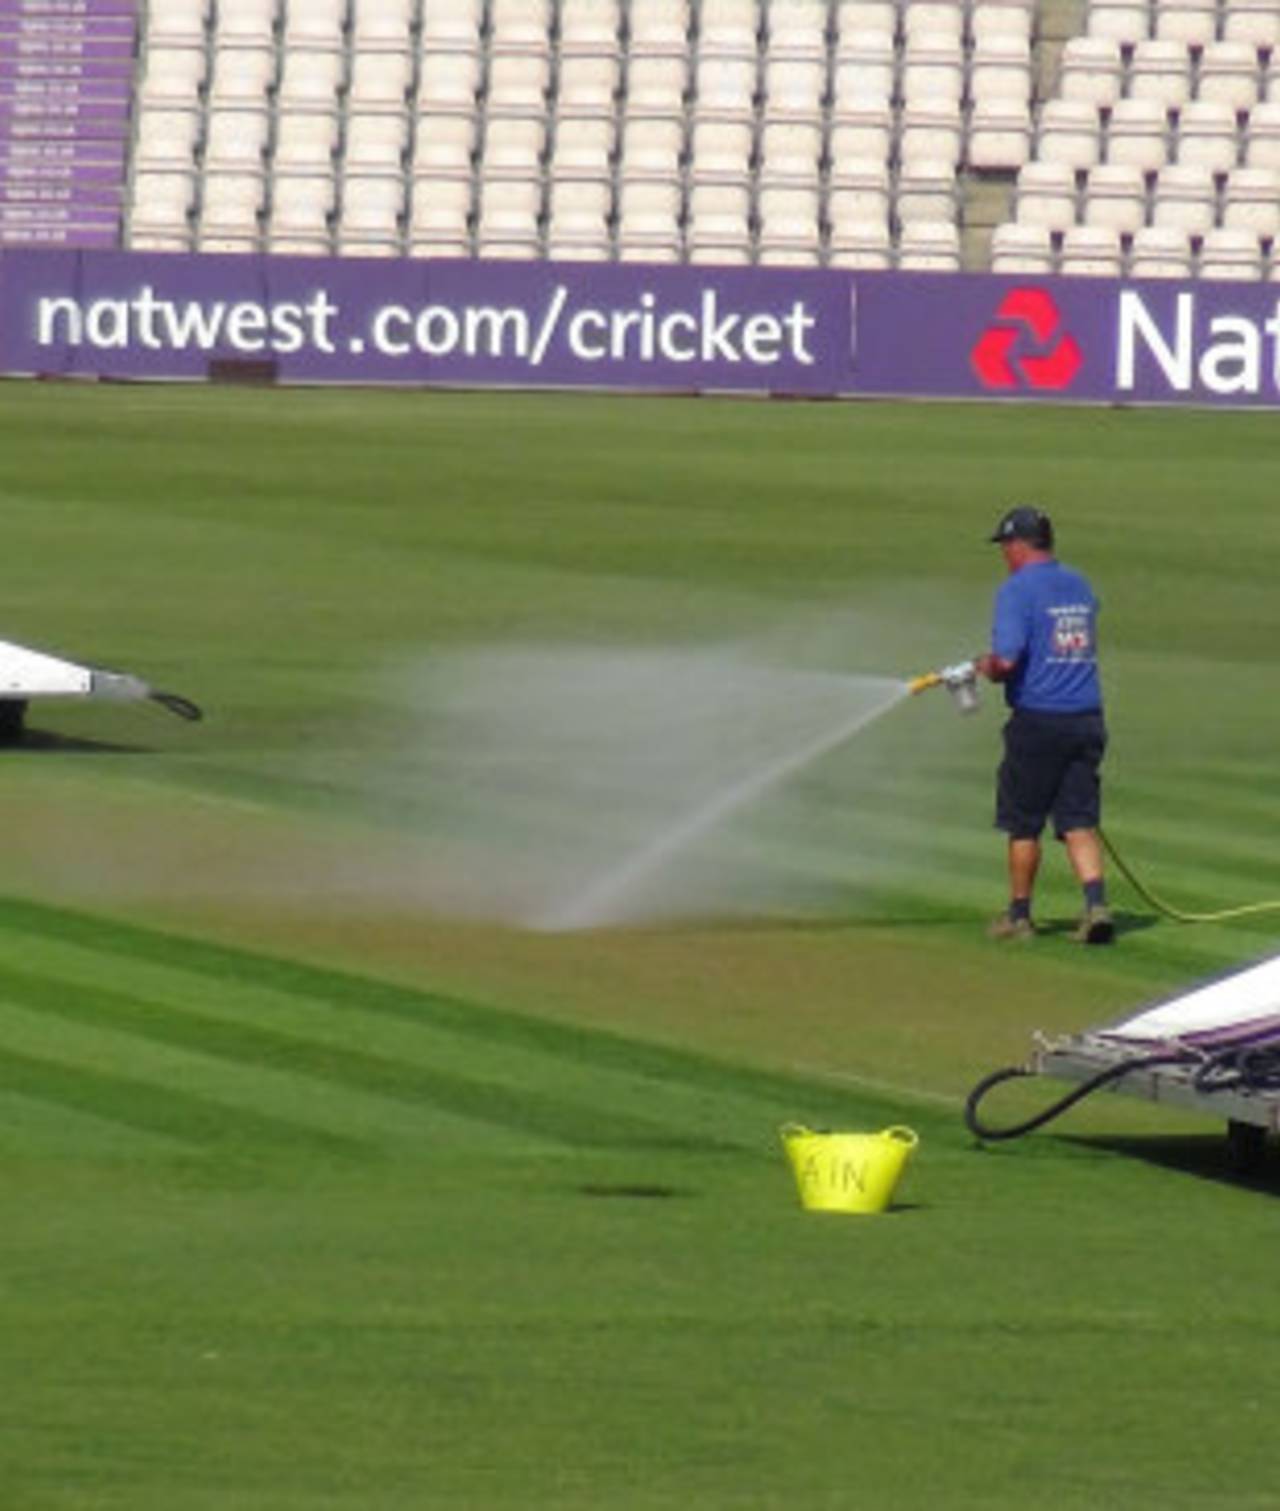 Pretty green: The groundsman expected the pitch to remain reasonably green by the toss despite the warm weather&nbsp;&nbsp;&bull;&nbsp;&nbsp;ESPNcricinfo Ltd